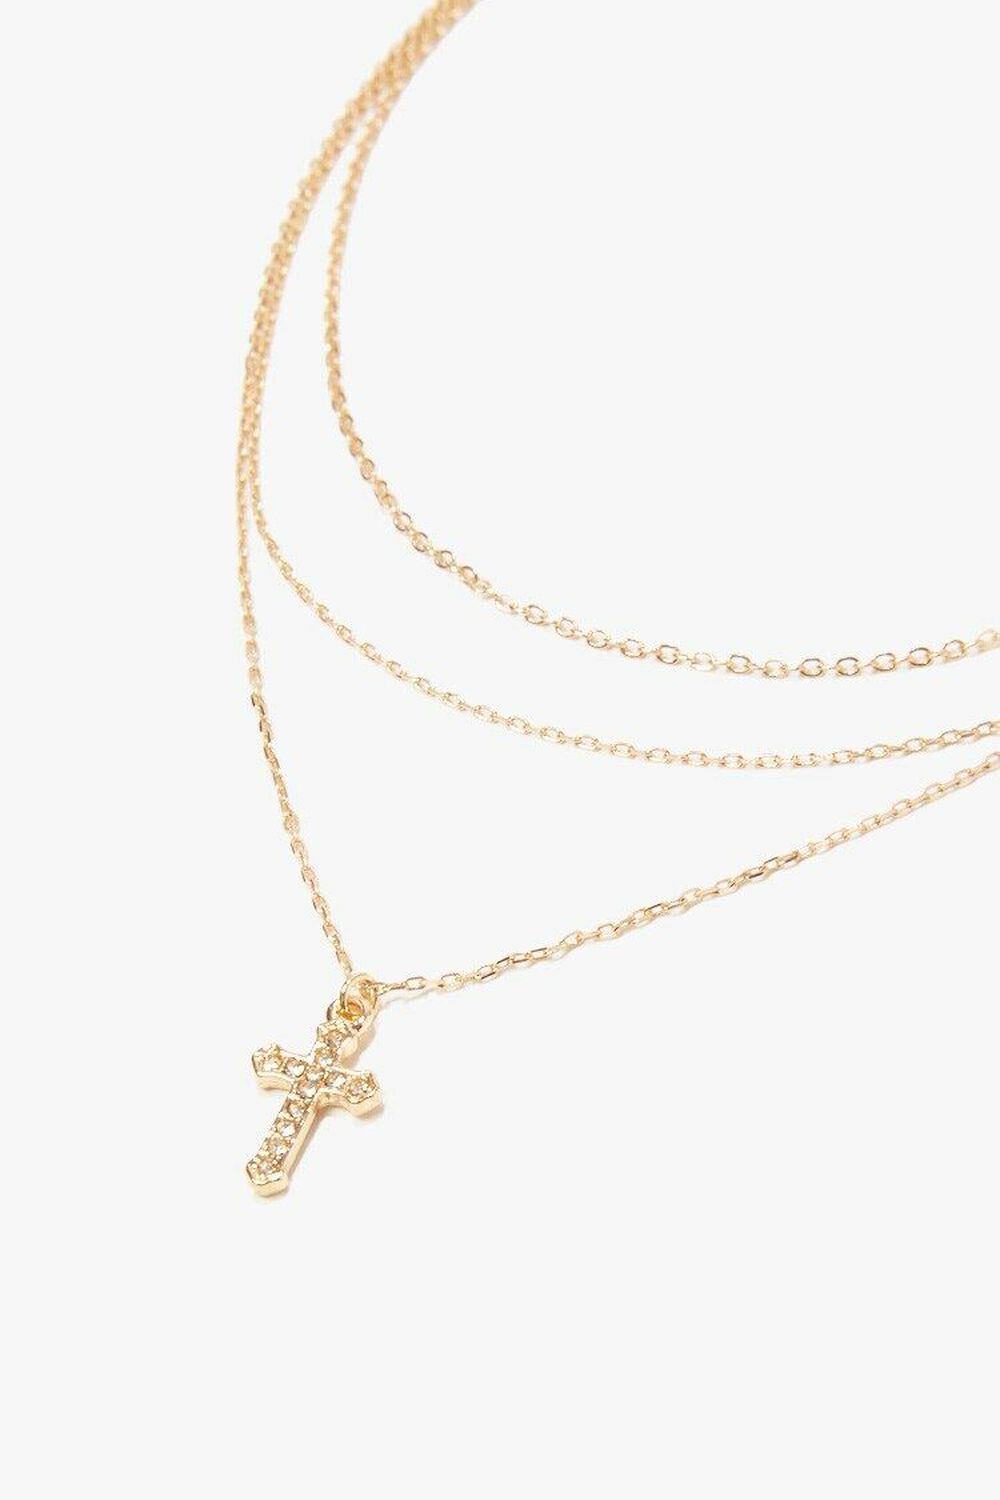 GOLD/CLEAR Layered Cross Pendant Necklace, image 1